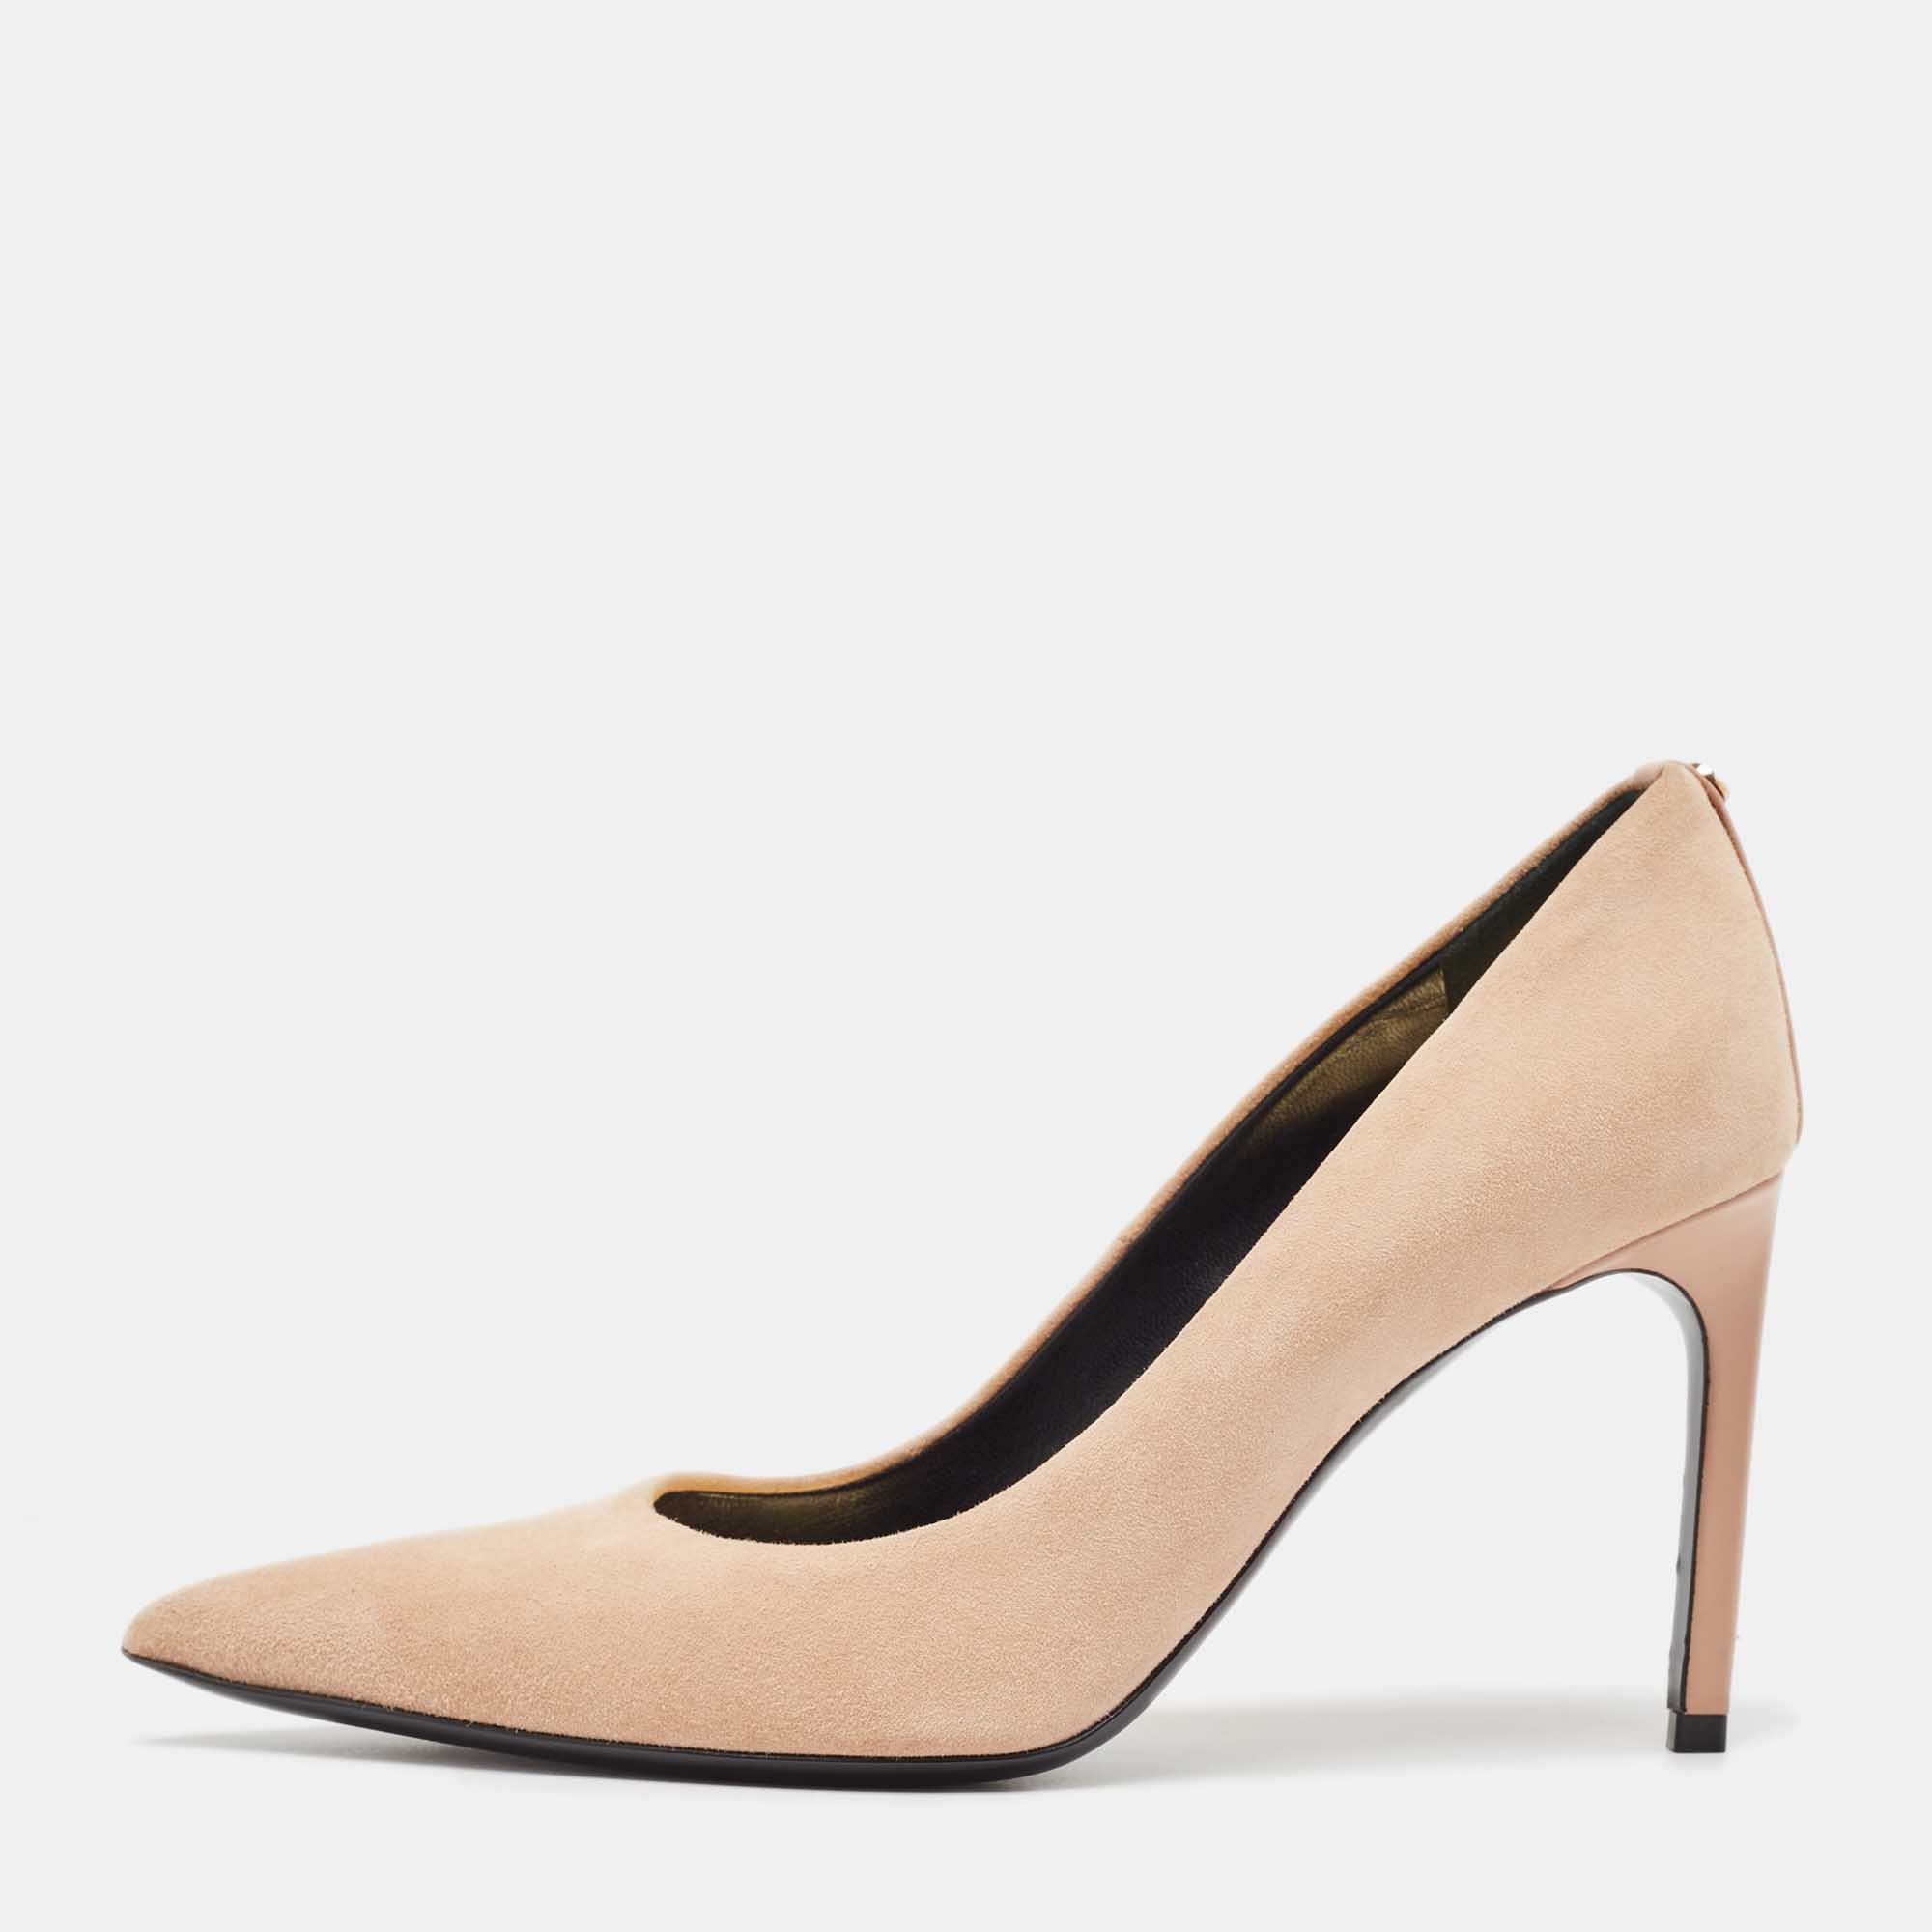 Tom ford beige suede pointed toe pumps size 37